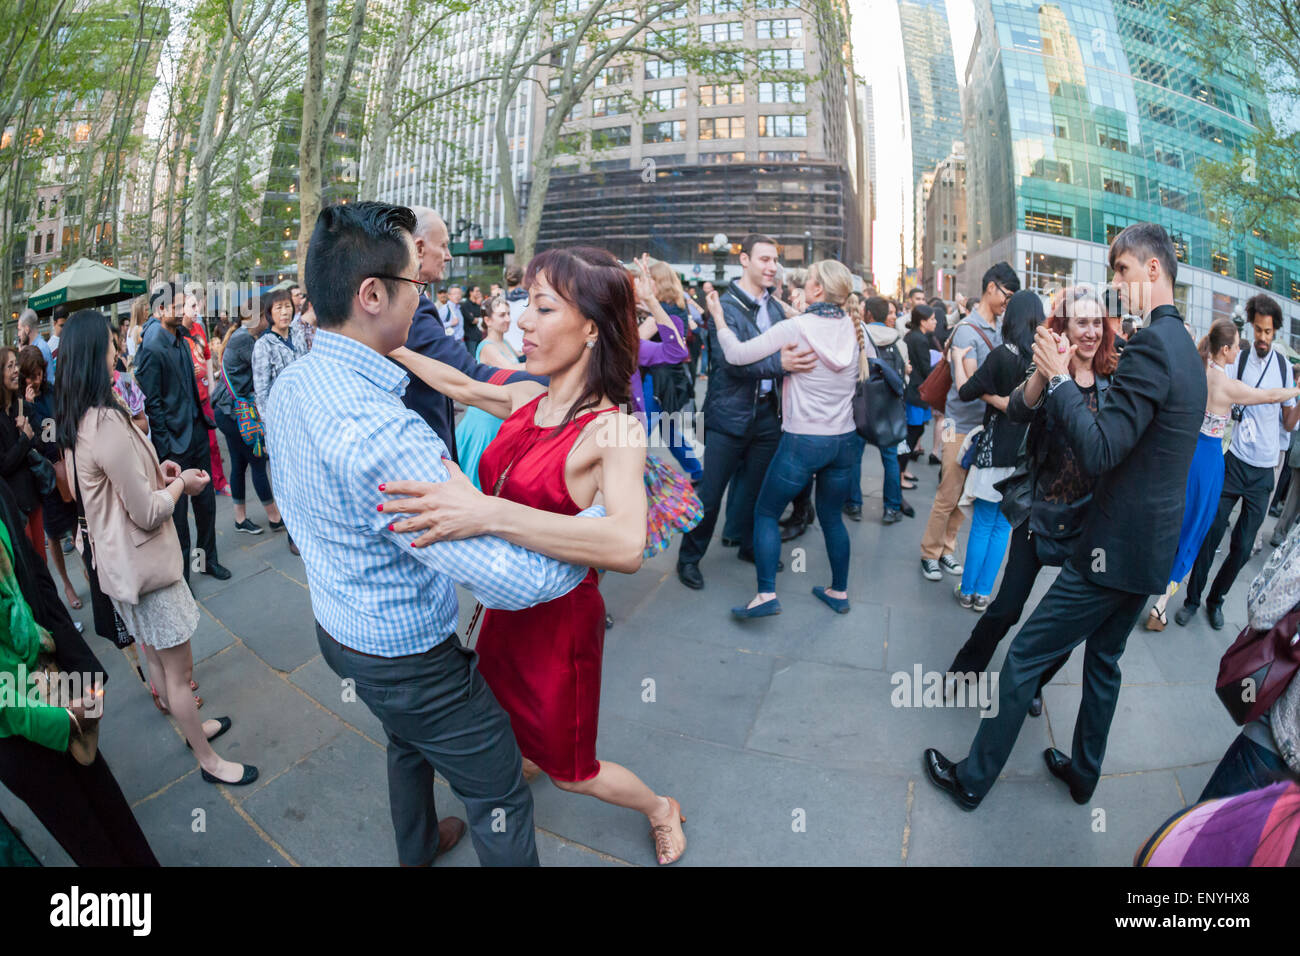 Hundreds channel their inner Fred Astaire and Ginger Rogers as they waltz the night away on the opening night of Dancing in Bryant Park, with a Waltz Ball, in New York on Wednesday, May 6, 2015. Everyone from beginners to amateur competitors participated in the weekly event, featuring a different style of dance each week. Live music and instruction complimented the popular event. (© Richard B. Levine) Stock Photo